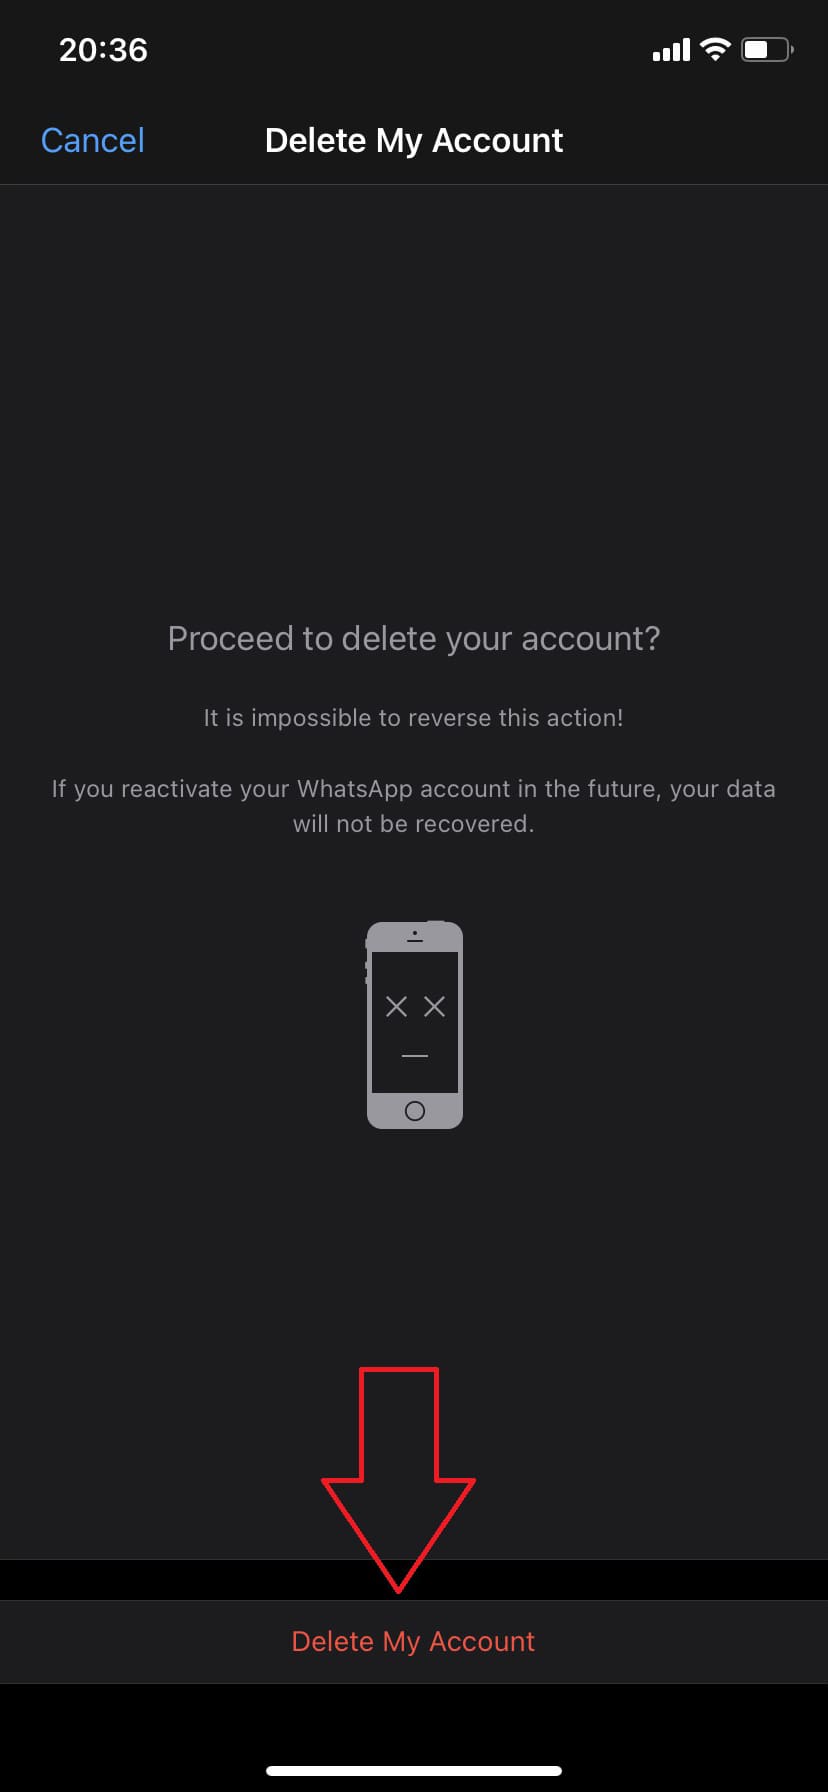 The sixth step is to delete the WhatsApp account on iOS